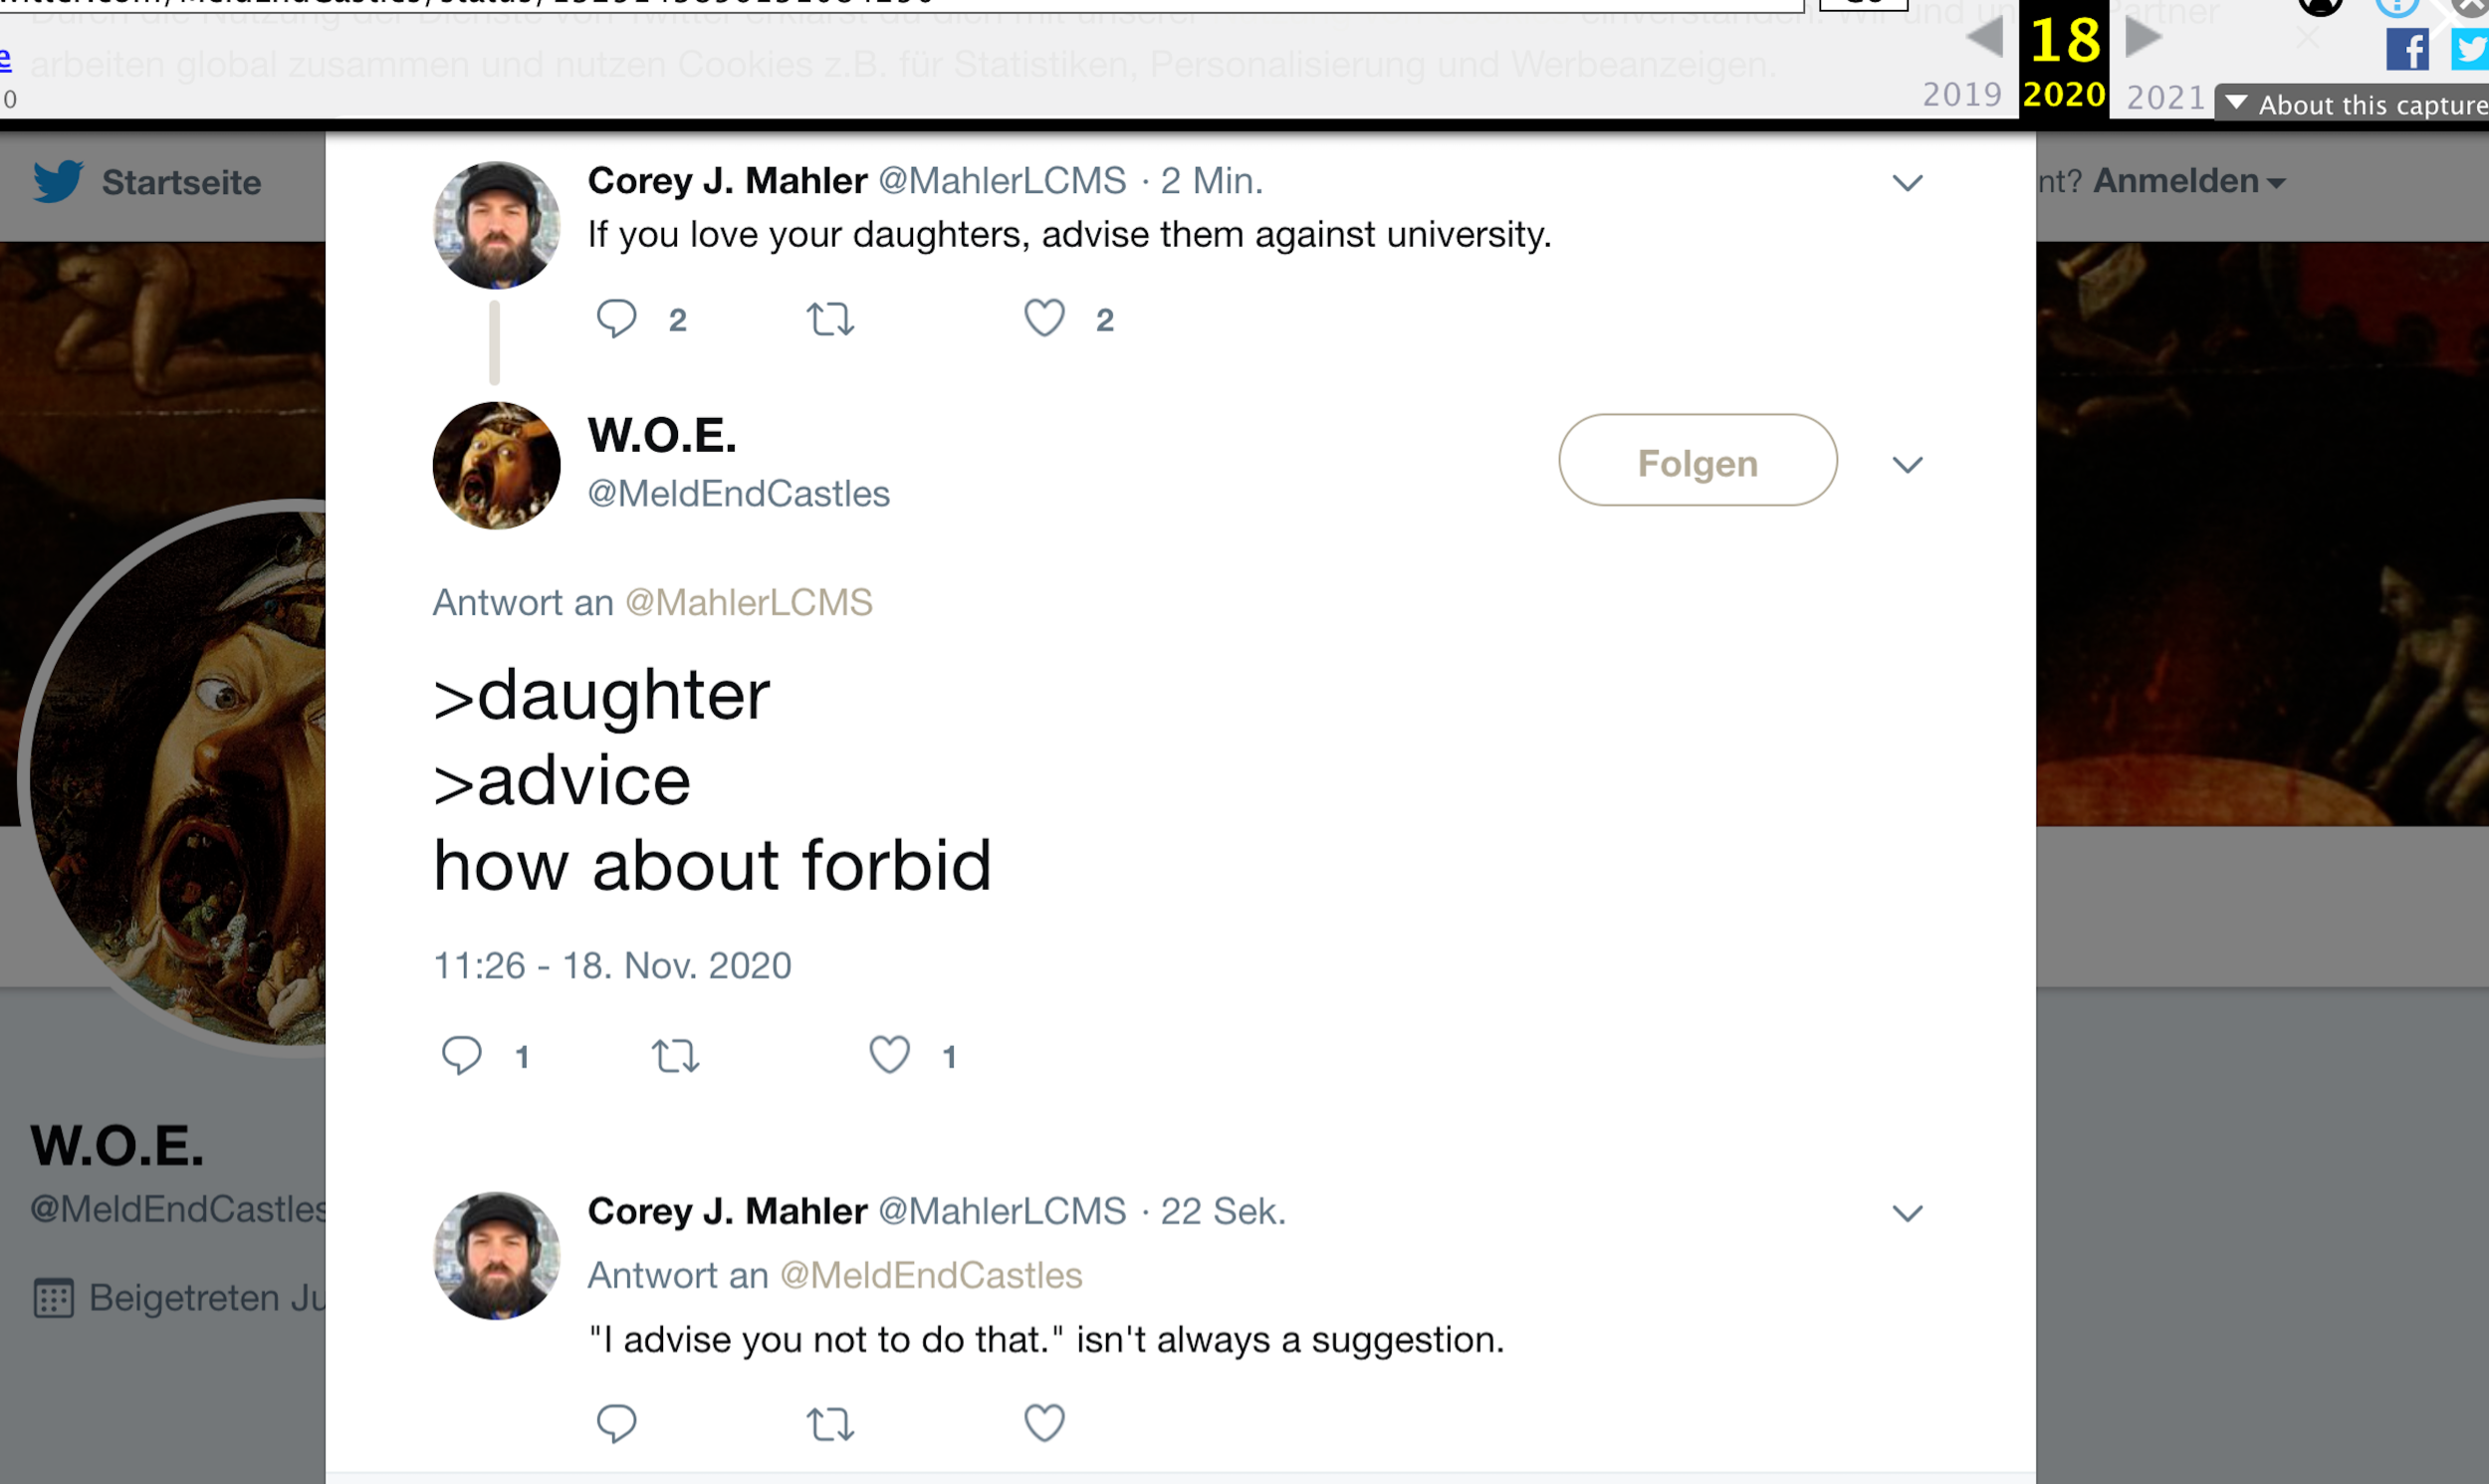 Treblewoe as Meldendcastles interacting with Corey Mahler. Mahler says that men should advise their daughters not to go to college, Woe says they should “forbid” and not “advise,” and Mahler says that “advise” doesn’t mean asking for permission. Dated 18 Nov. 2020.